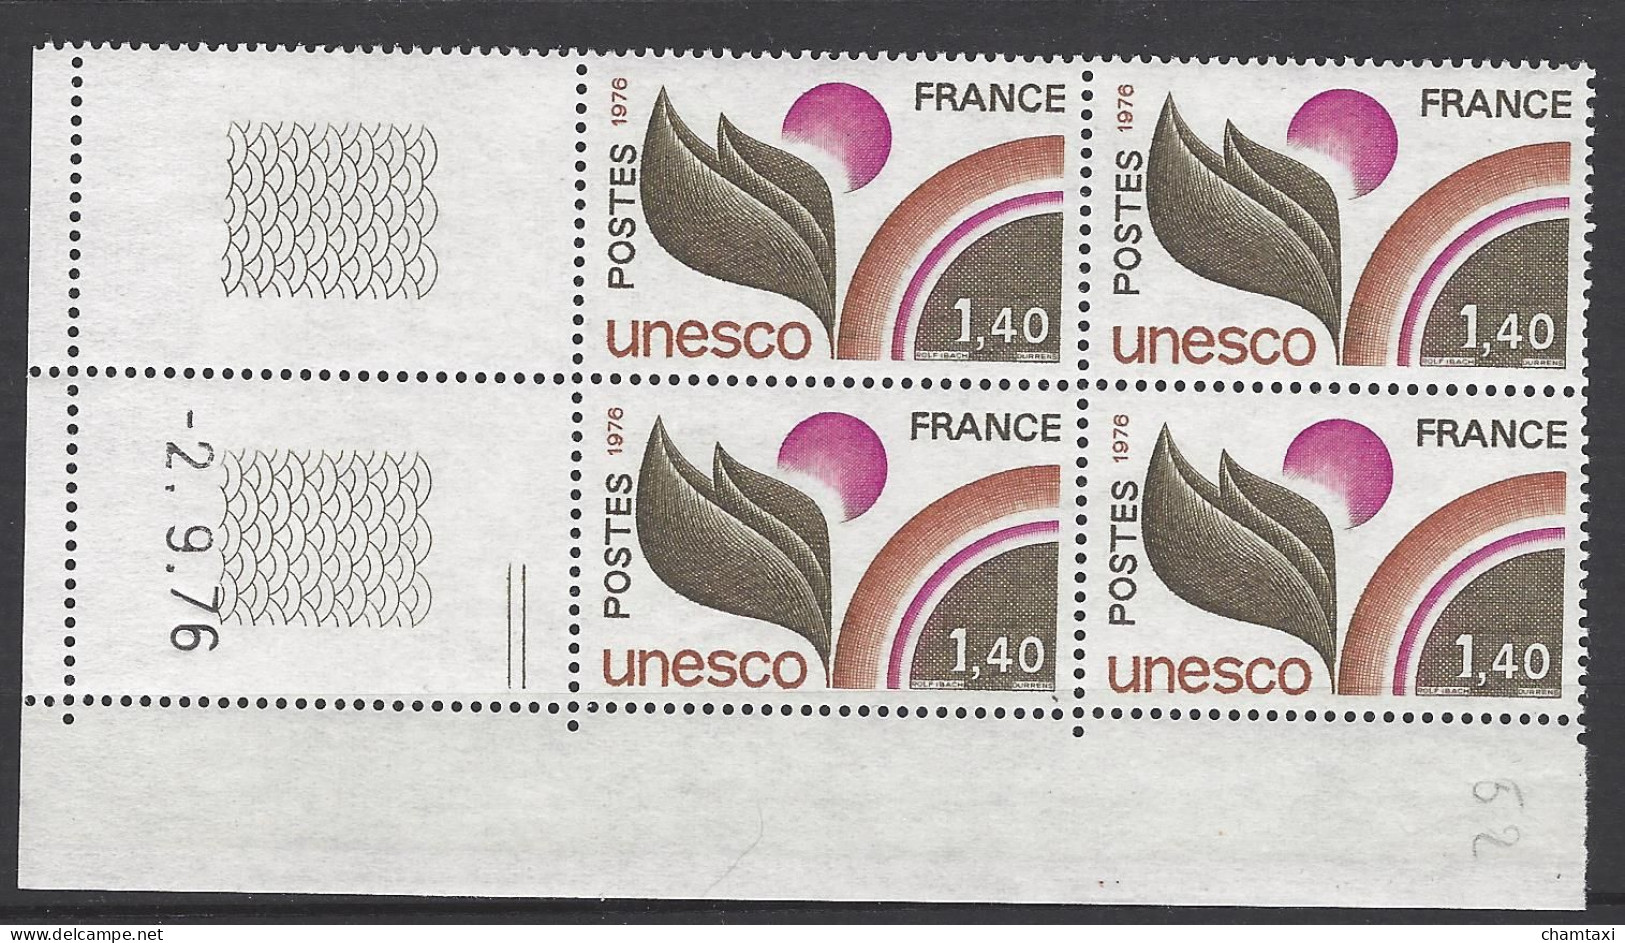 CD 52 FRANCE 1976 TIMBRE SERVICE UNESCO COIN DATE 52 : 2 / 9 / 76 - Service